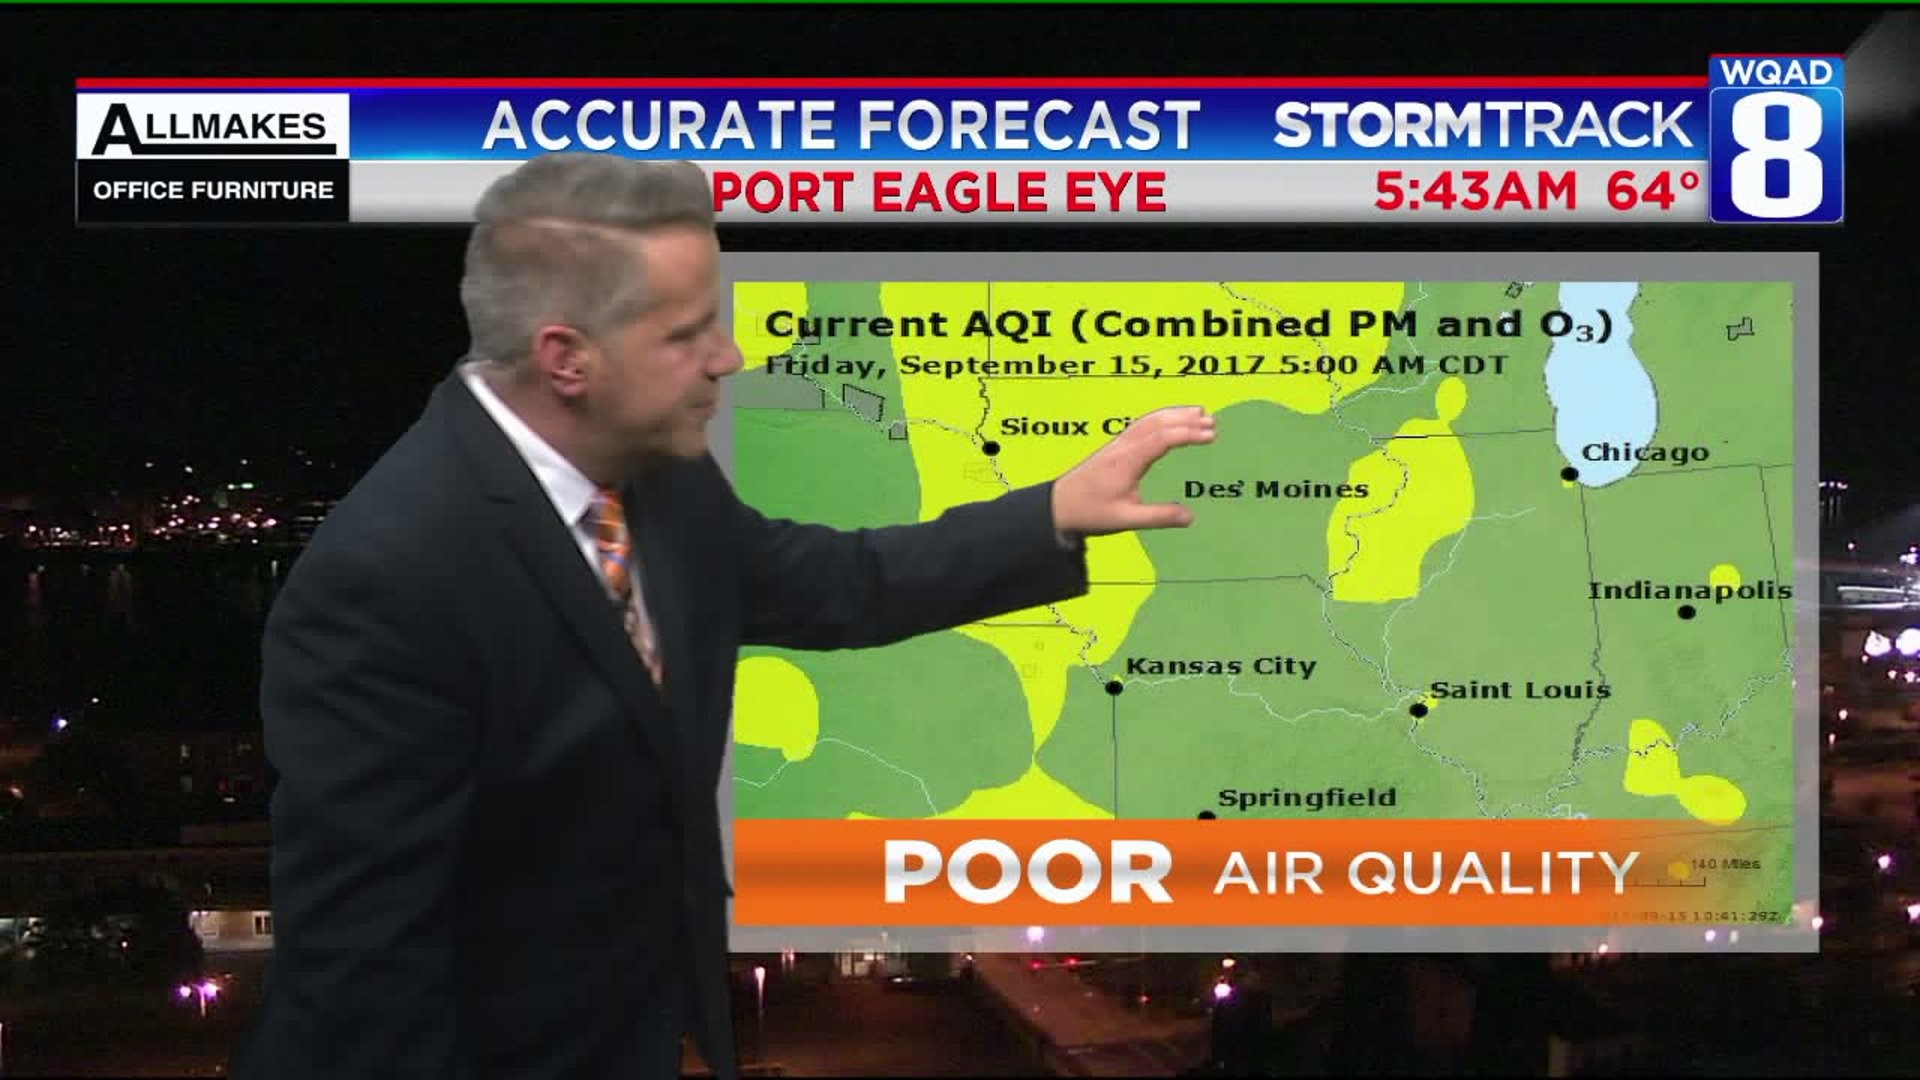 Eric explains why air quality is poor this morning